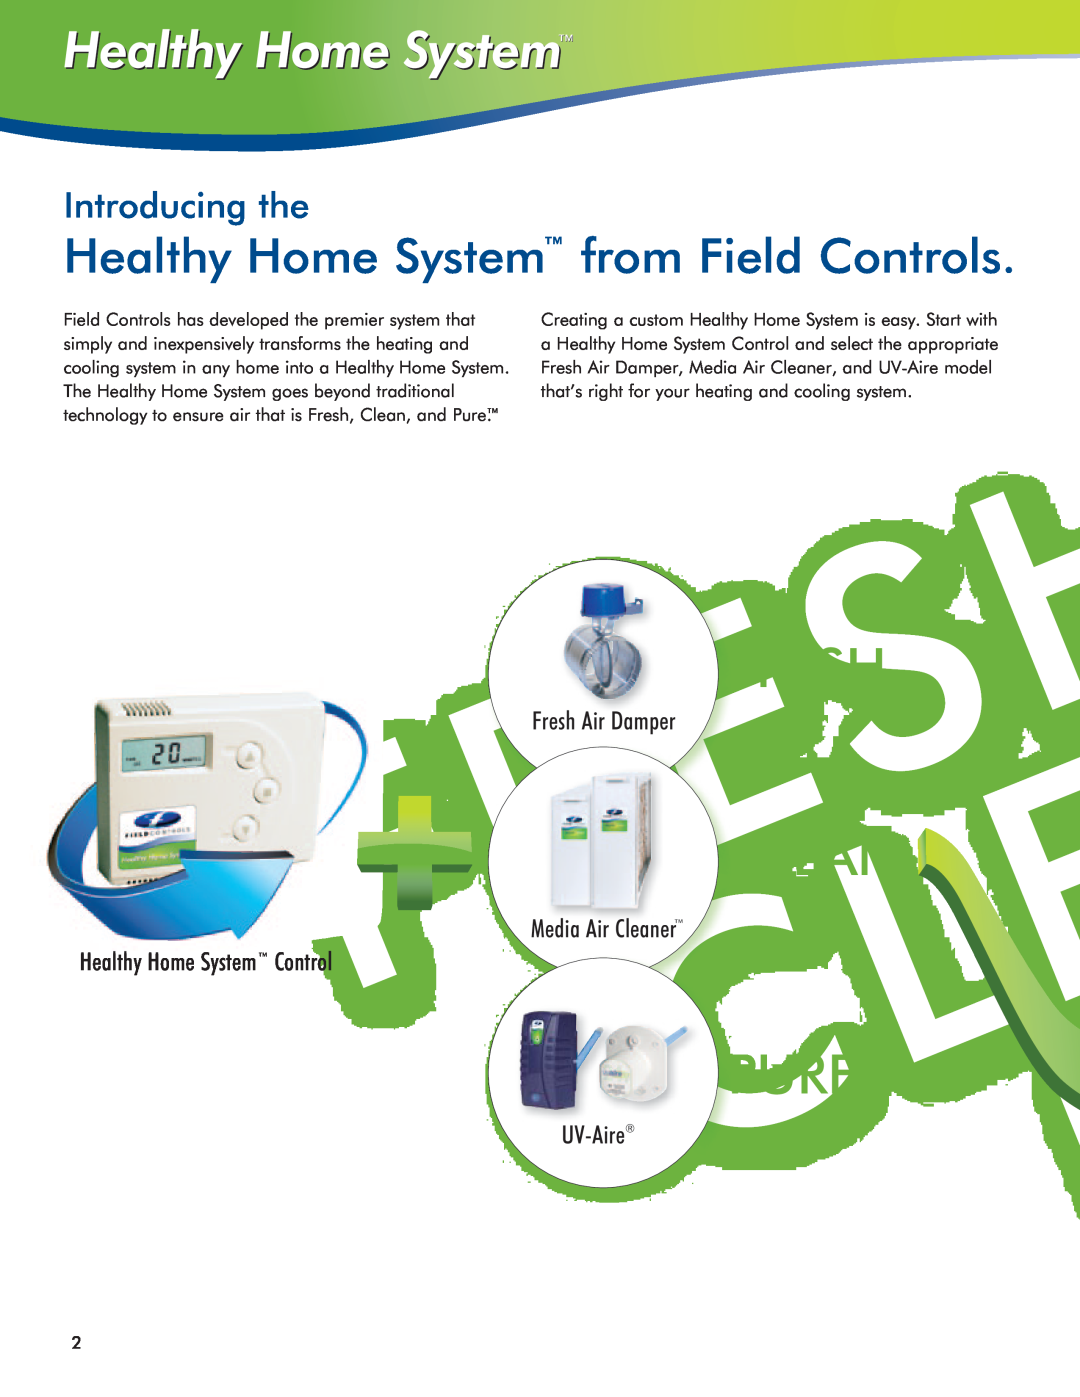 Field Controls IAQ11 manual Healthy Home System from Field Controls, Fresh Air Damper, Media Air Cleaner, UV-Aire, Pure 